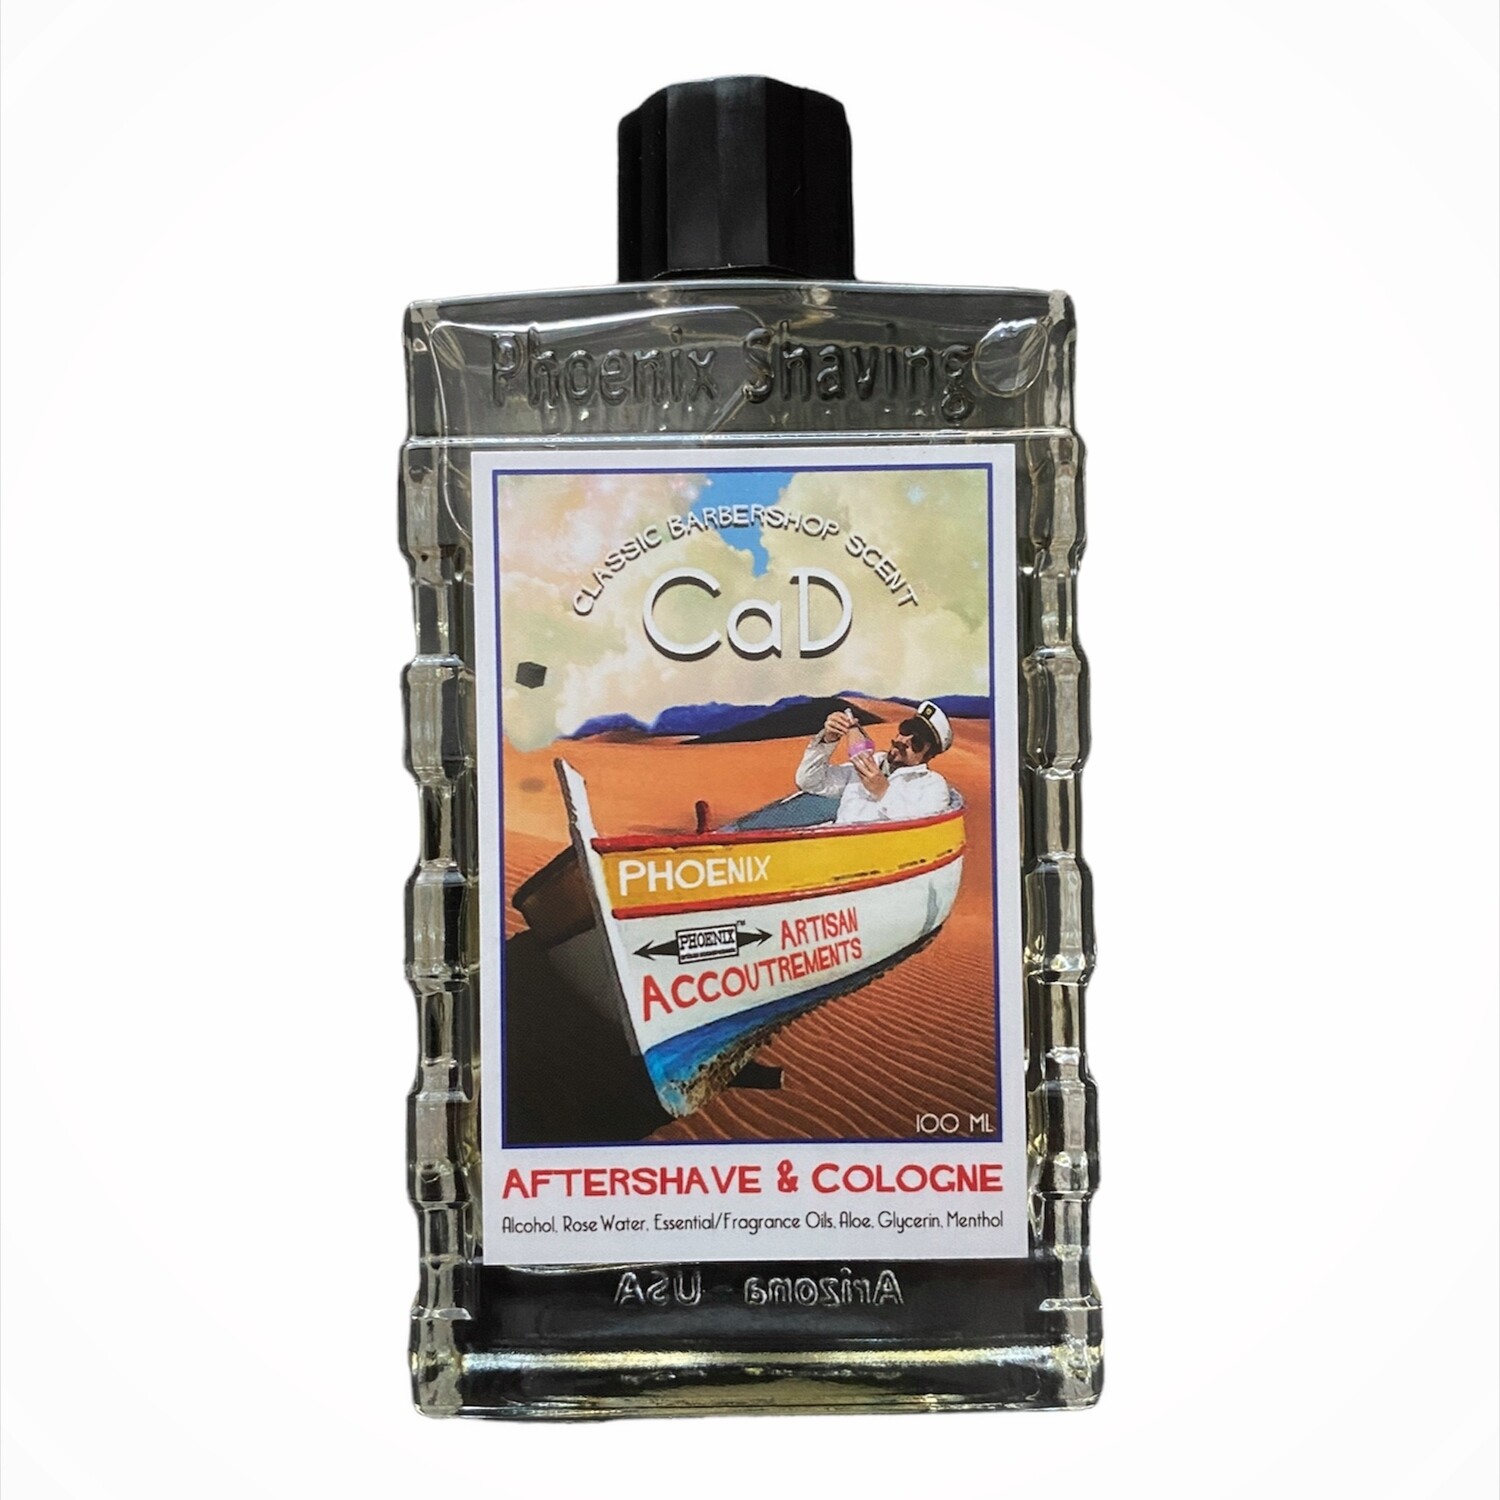 Phoenix Artisan Accoutrements CaD After Shave & Cologne